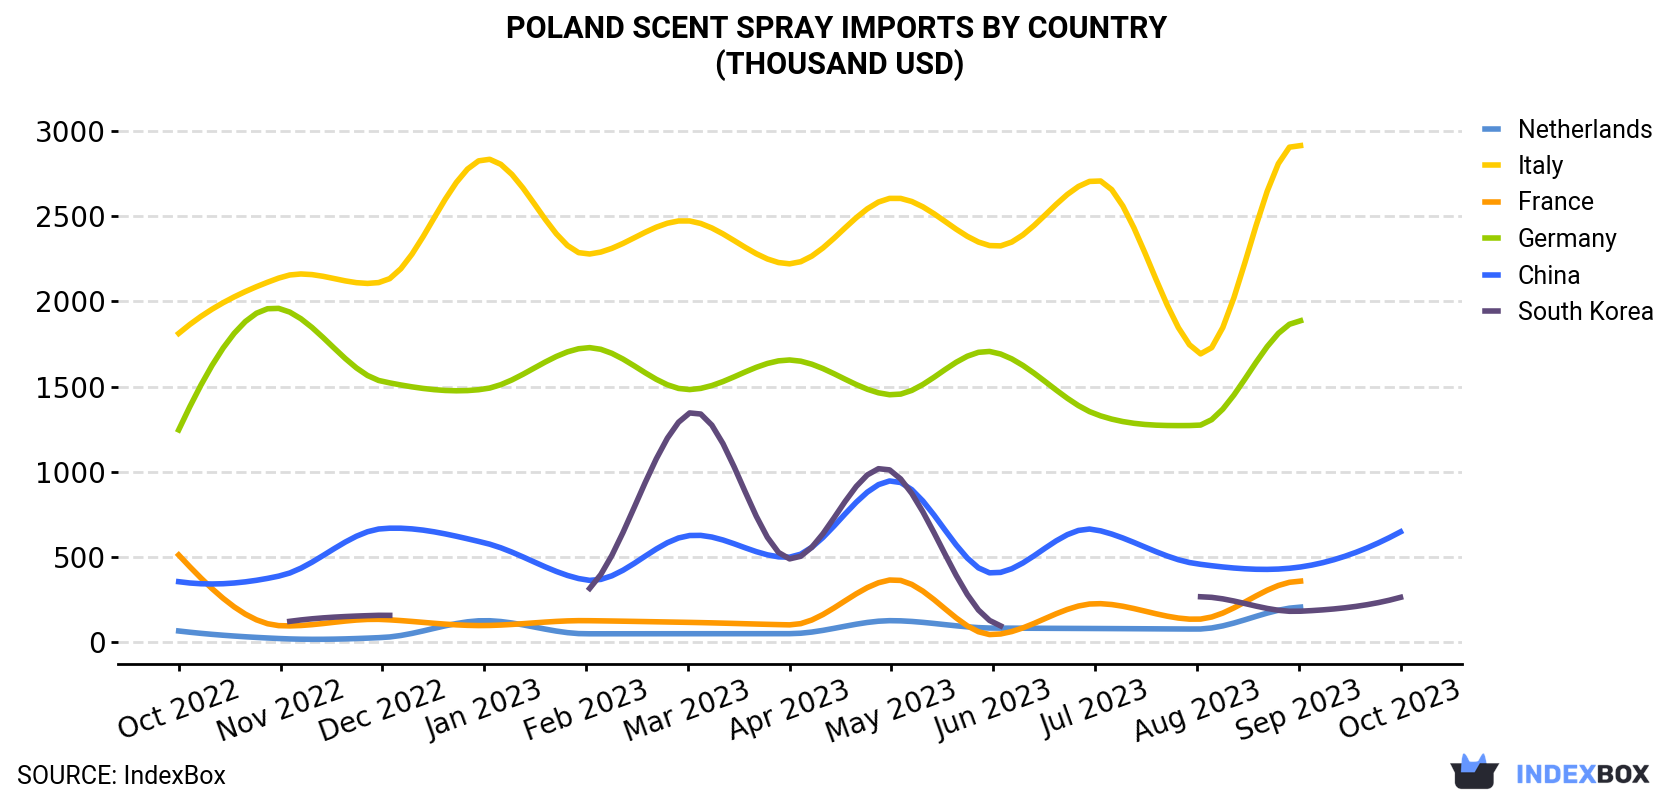 Poland Scent Spray Imports By Country (Thousand USD)